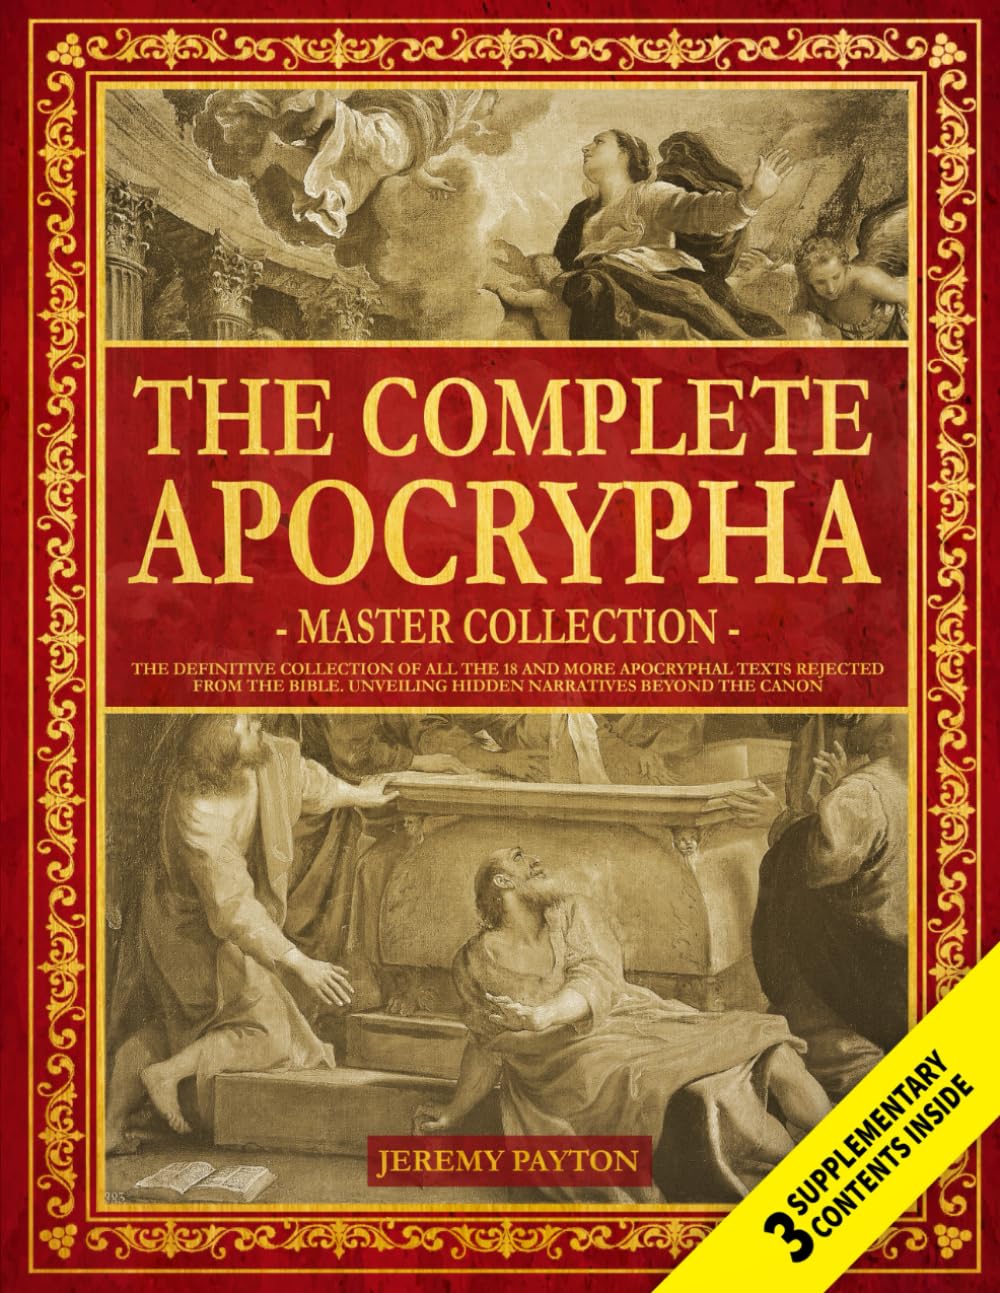 The Complete Apocrypha: The Definitive Collection of All the 18 and More Apocryphal Texts Rejected from the Bible. Unveiling Hidden Narratives beyond the Canon